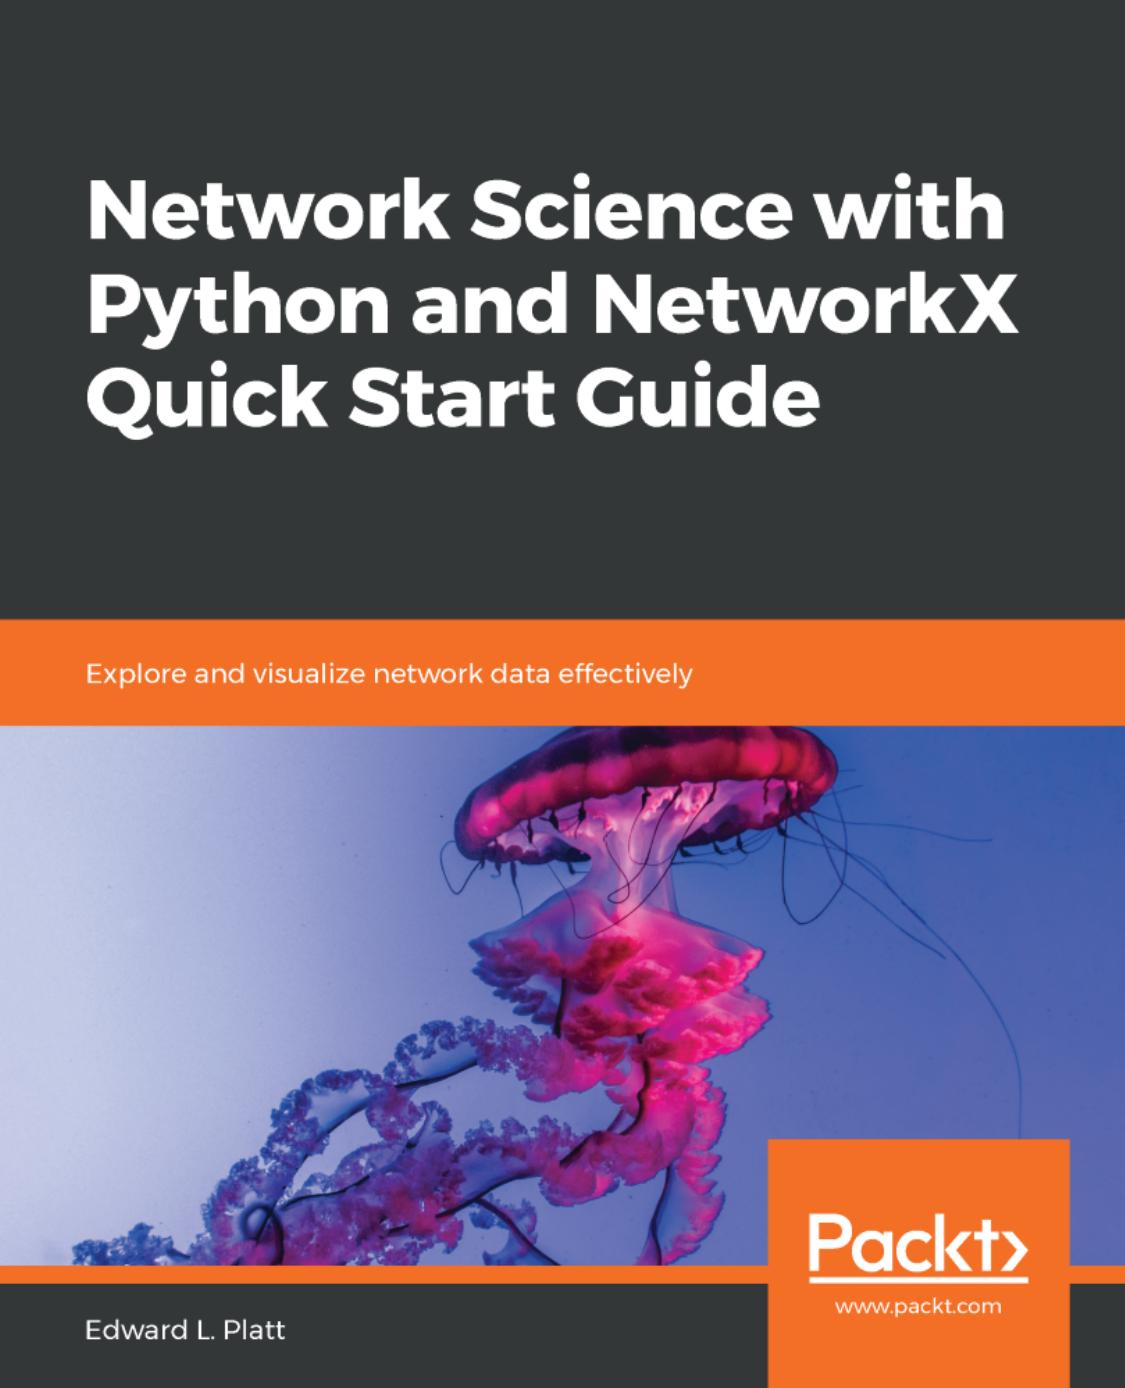 Network Science With Python and NetworkX Quick Start Guide: Explore and Visualize Network Data Effectively